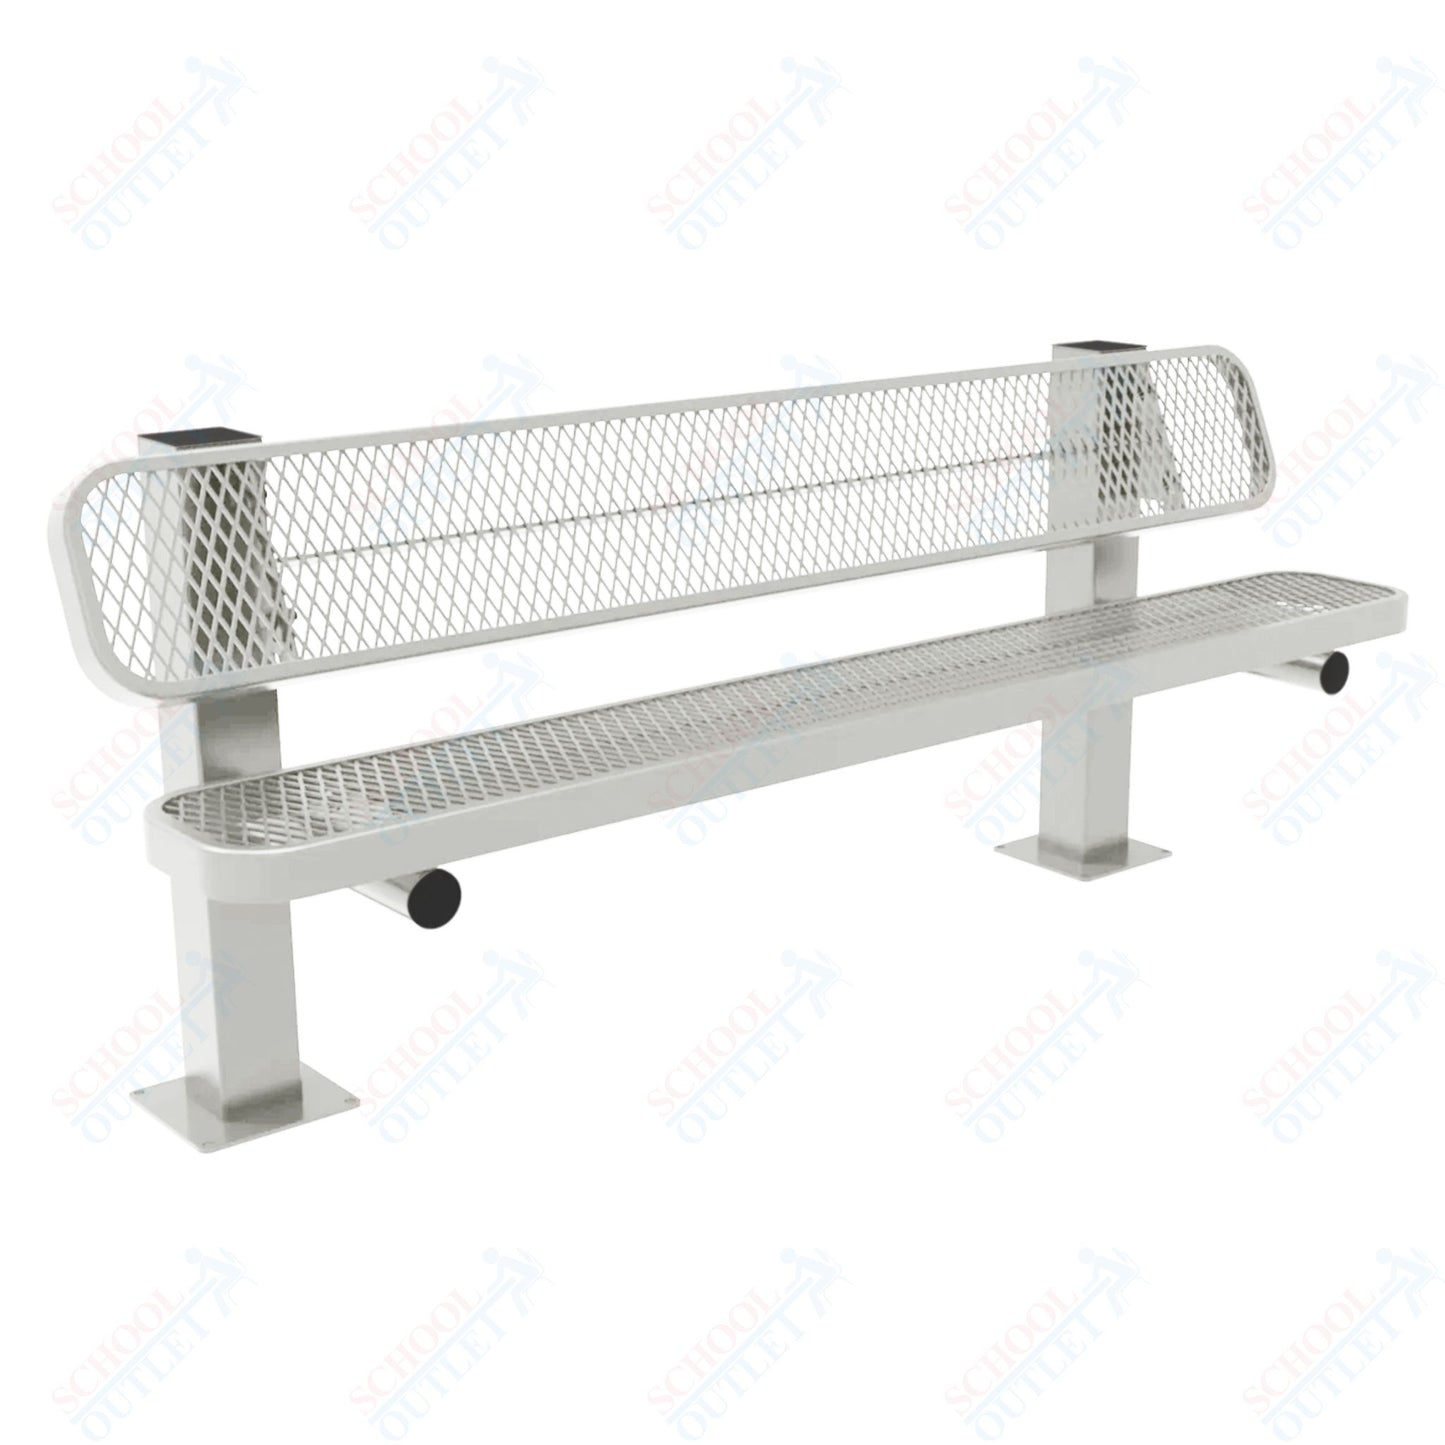 MyTcoat - Single Pedstal Outdoor Bench with Back - Surface Mount 6' L (MYT-BRT06-62)